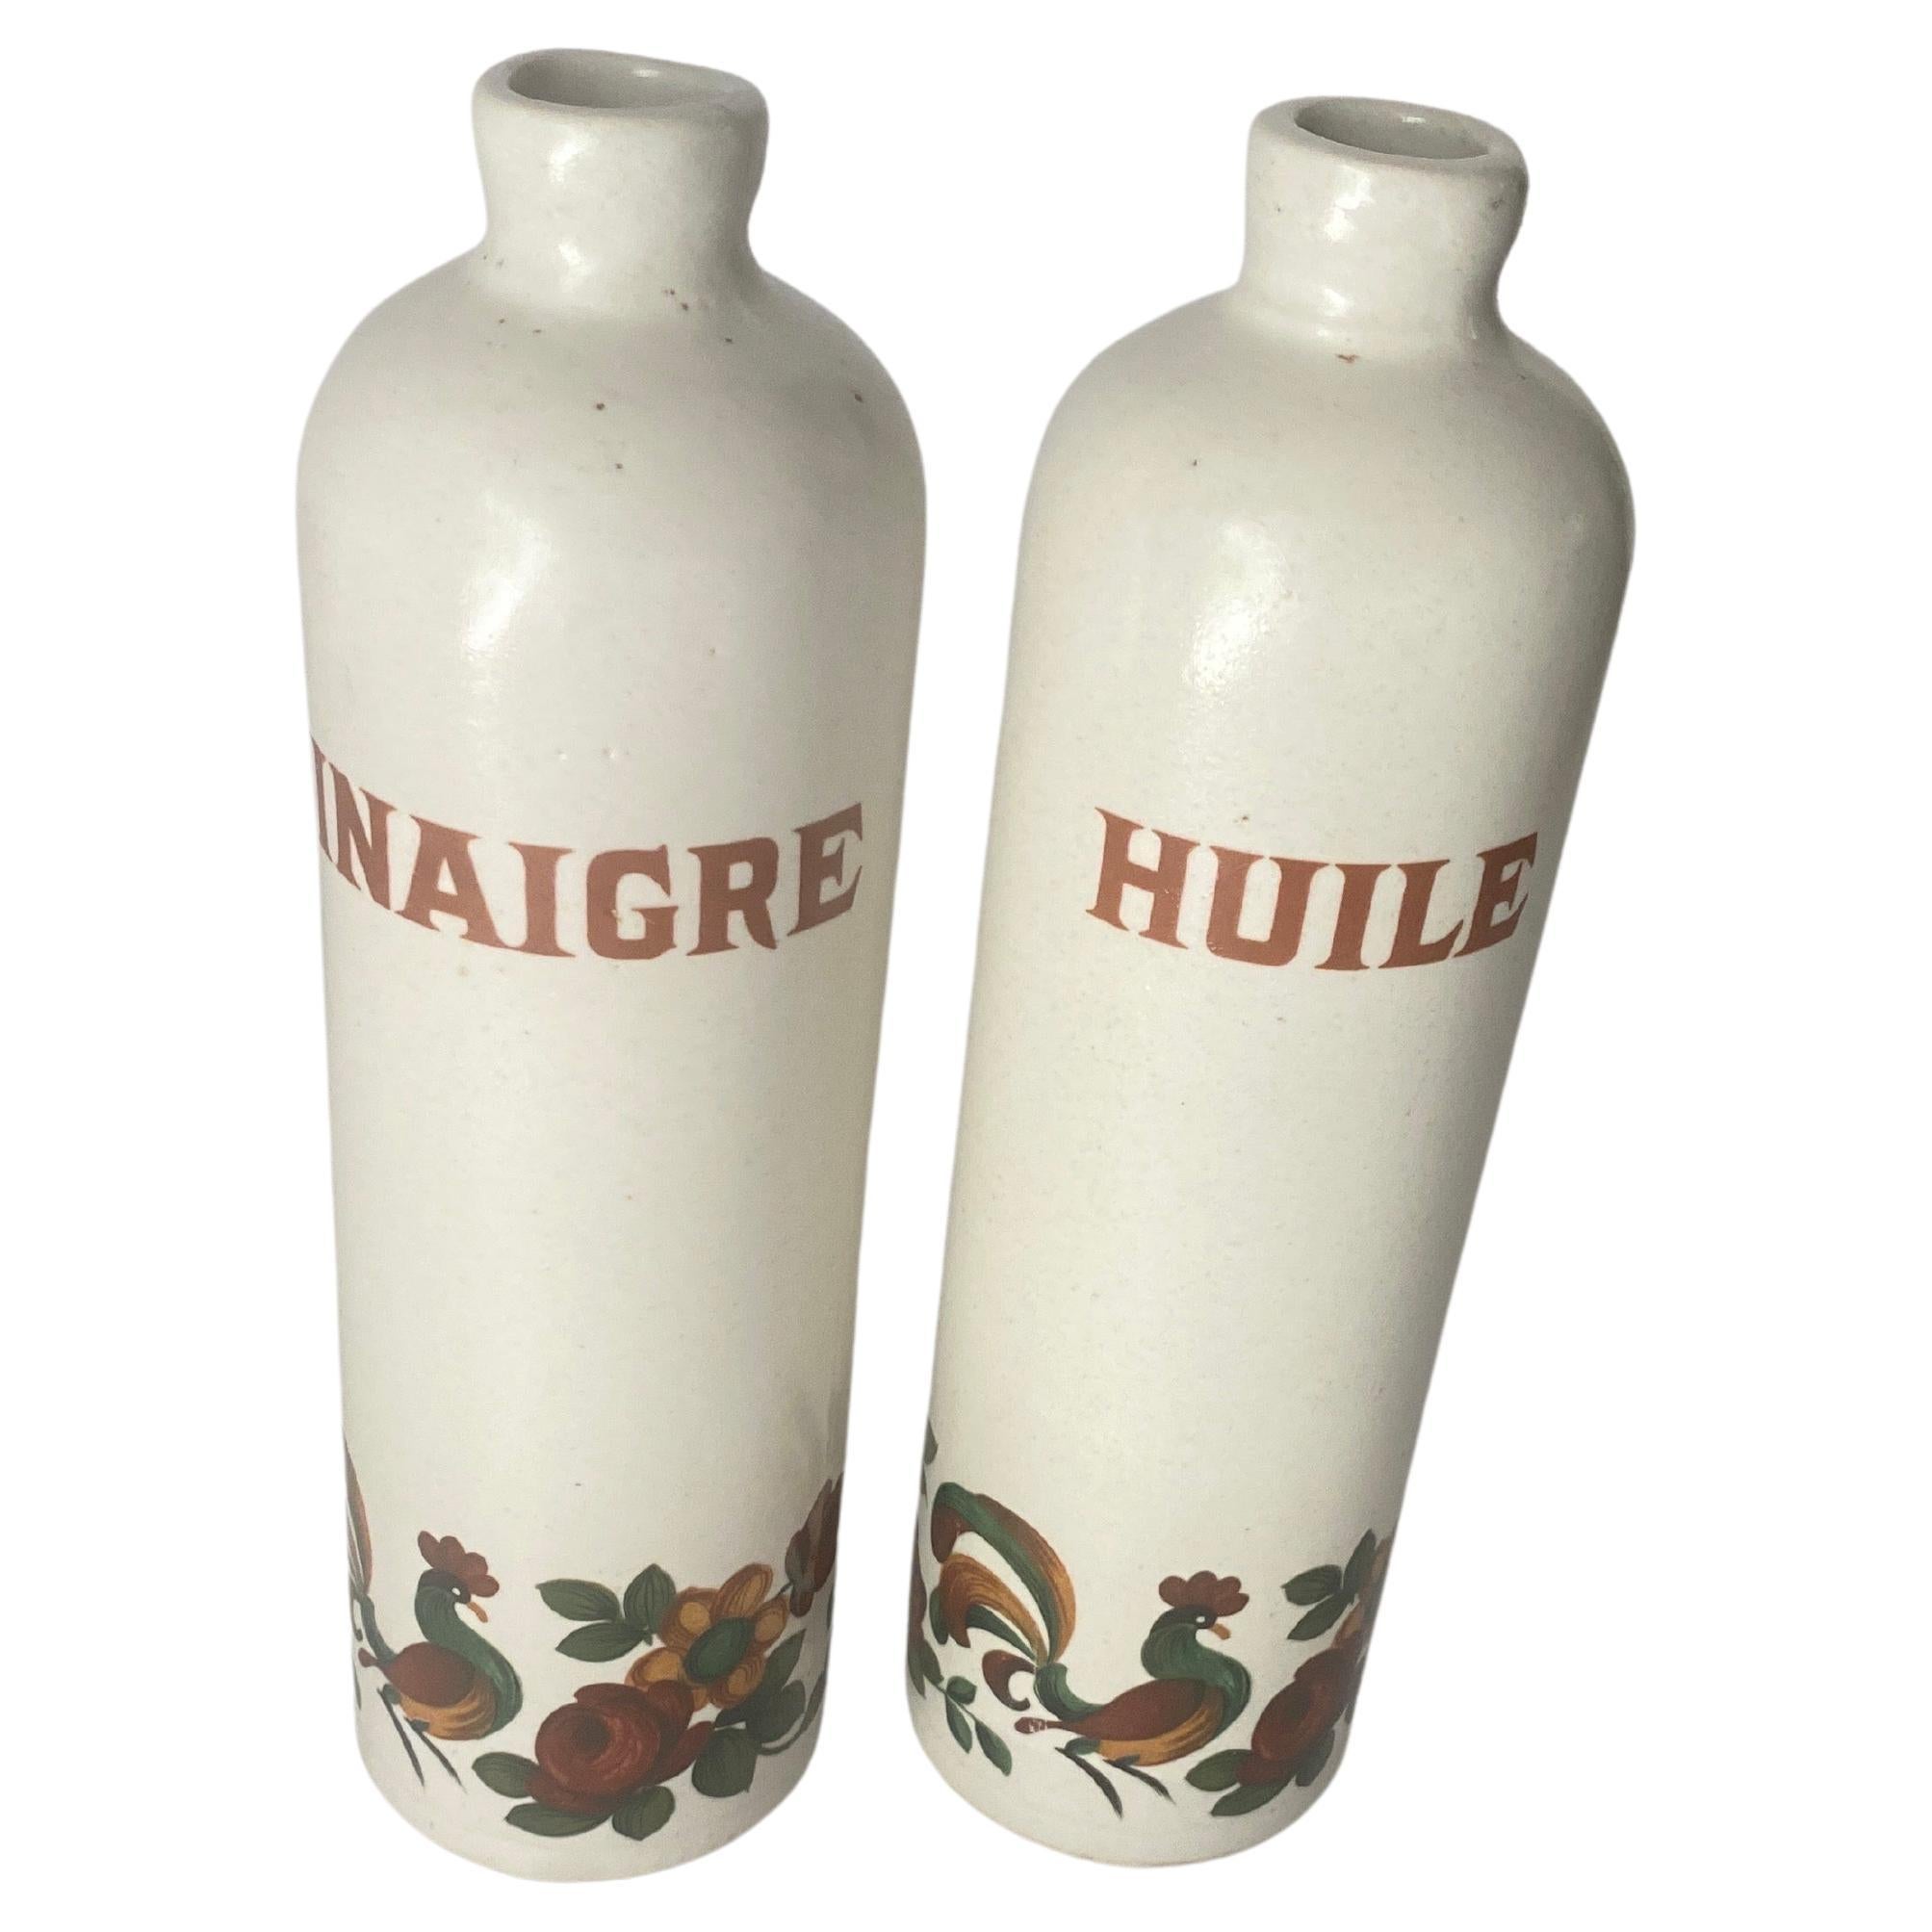 A pair of oil and vinegar bottles in Faince in Beige color. It has been made in France durint the 19th Century.
Decorated with flowers and Rooster pattern.